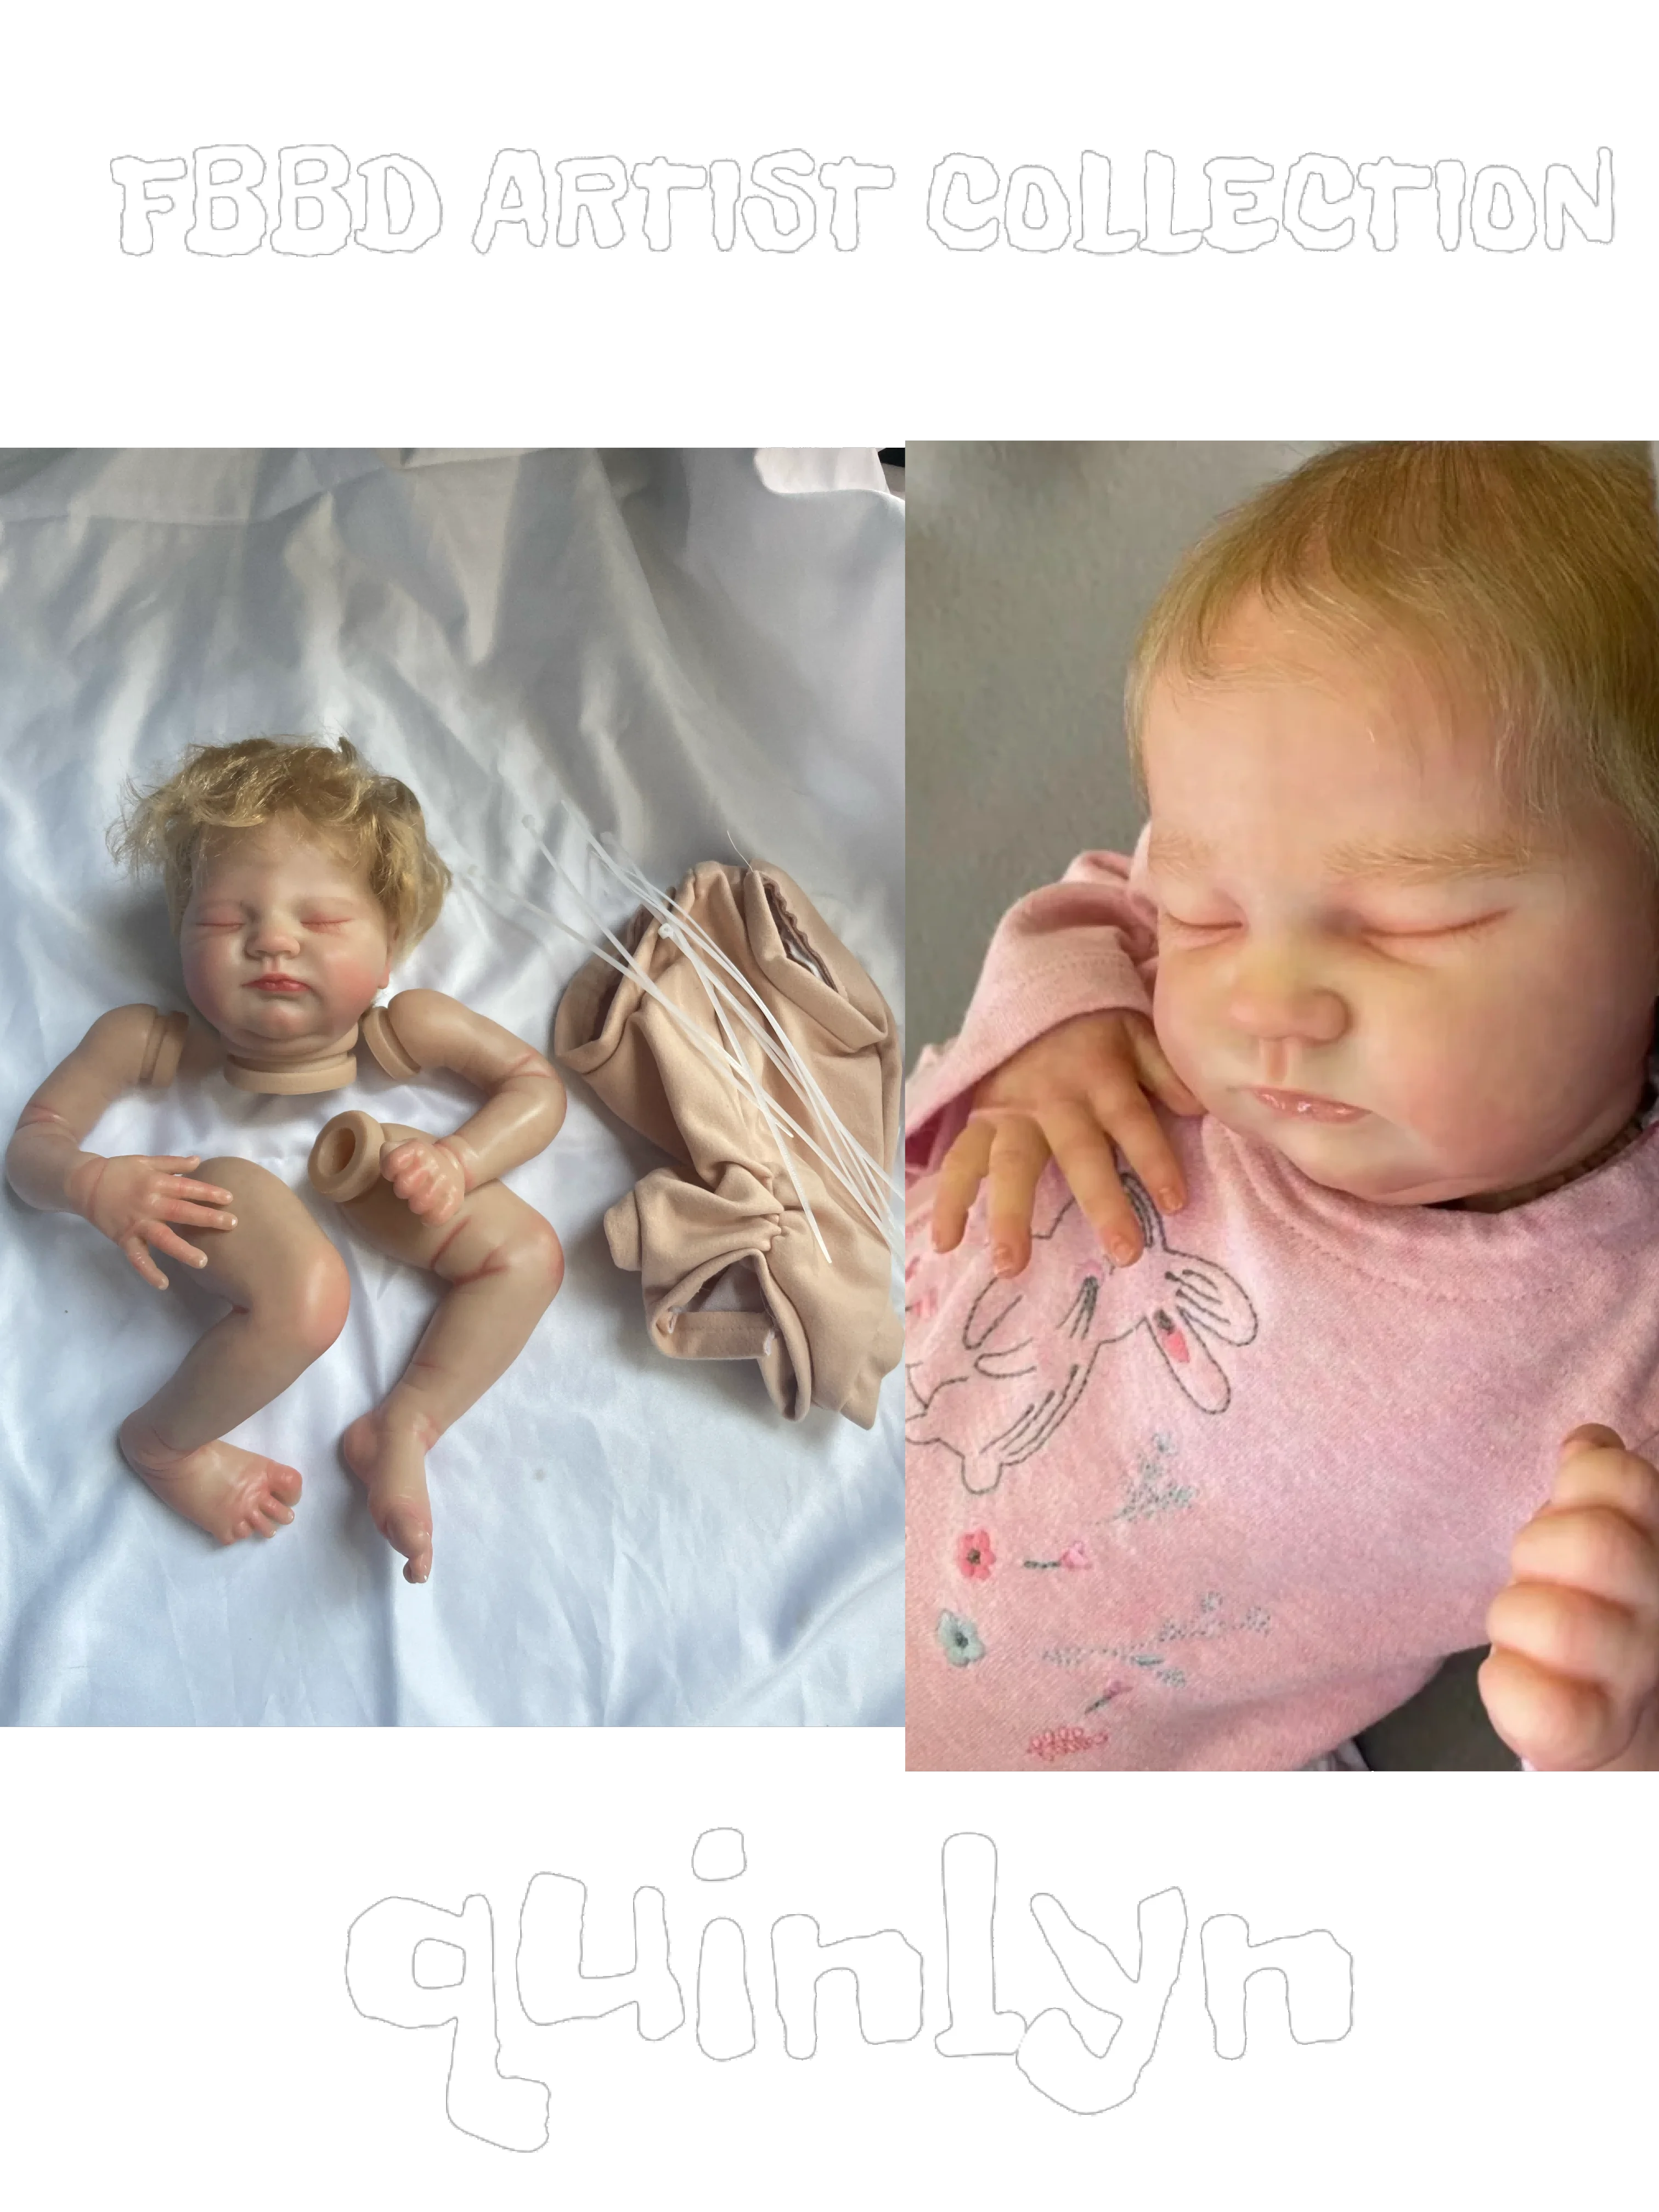 Quinlyn 20inch Bebe Reborn Painted Kit By FBBD Artist Unassembled Kit With Veins Lifelike With Hand-Rooted Hair Dolls For Girl 65cm reborn doll toddler finished soft touch 3d painted skin lifelike real bebe reborn with rooted hair muñecas para niñas